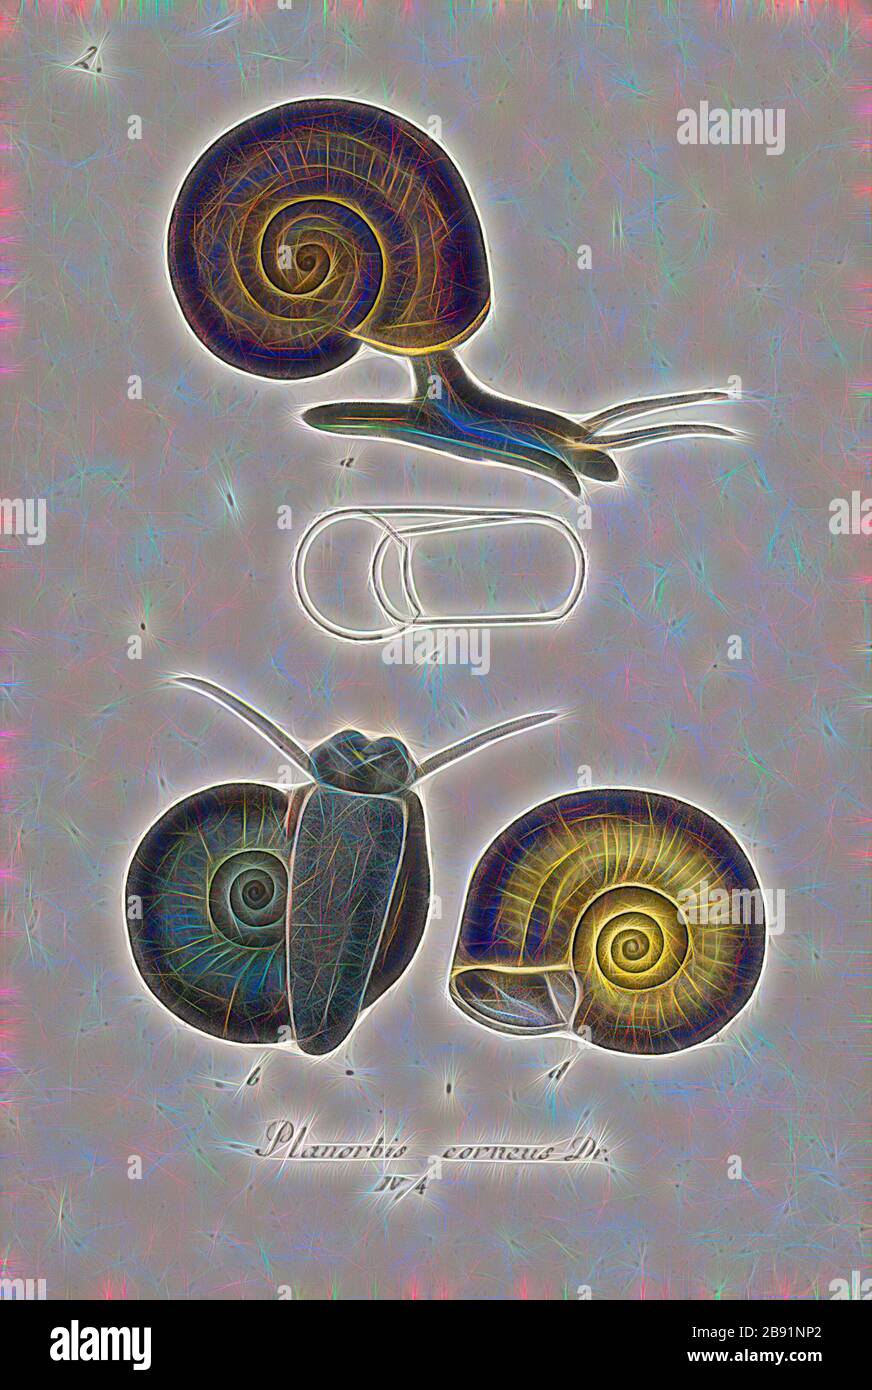 Planorbis corneus, Print, Planorbarius corneus, common name the great ramshorn, is a relatively large species of air-breathing freshwater snail, an aquatic pulmonate gastropod mollusk in the family Planorbidae, the ram's horn snails, or planorbids, which all have sinistral or left-coiling shells., Reimagined by Gibon, design of warm cheerful glowing of brightness and light rays radiance. Classic art reinvented with a modern twist. Photography inspired by futurism, embracing dynamic energy of modern technology, movement, speed and revolutionize culture. Stock Photo